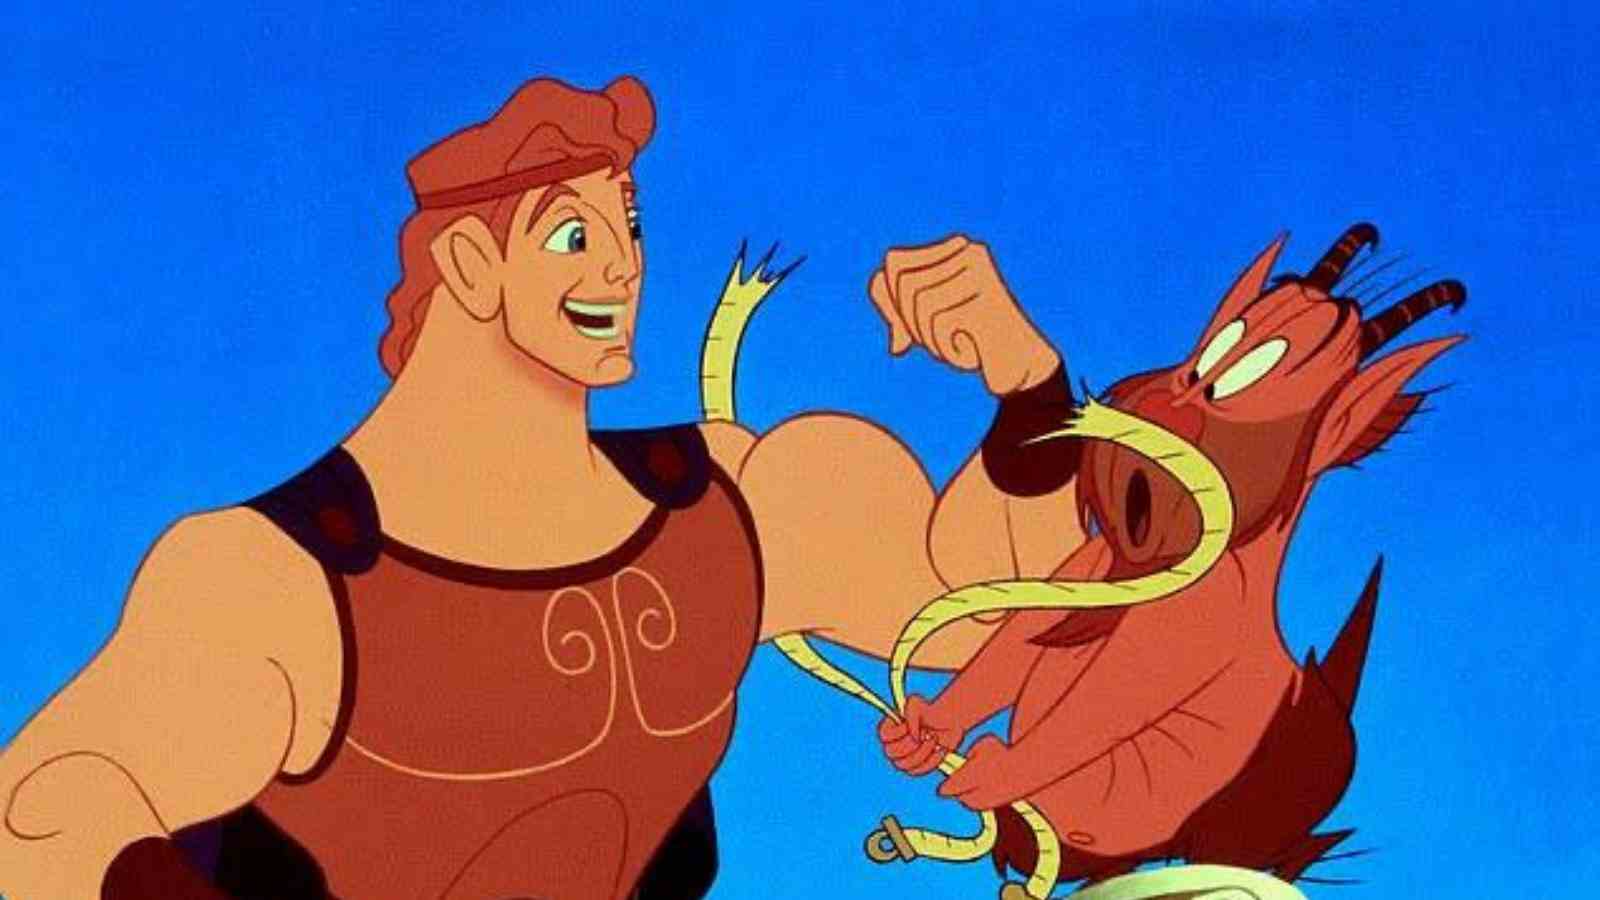 Russo Brothers will produce Disney's Hercules live-action remake